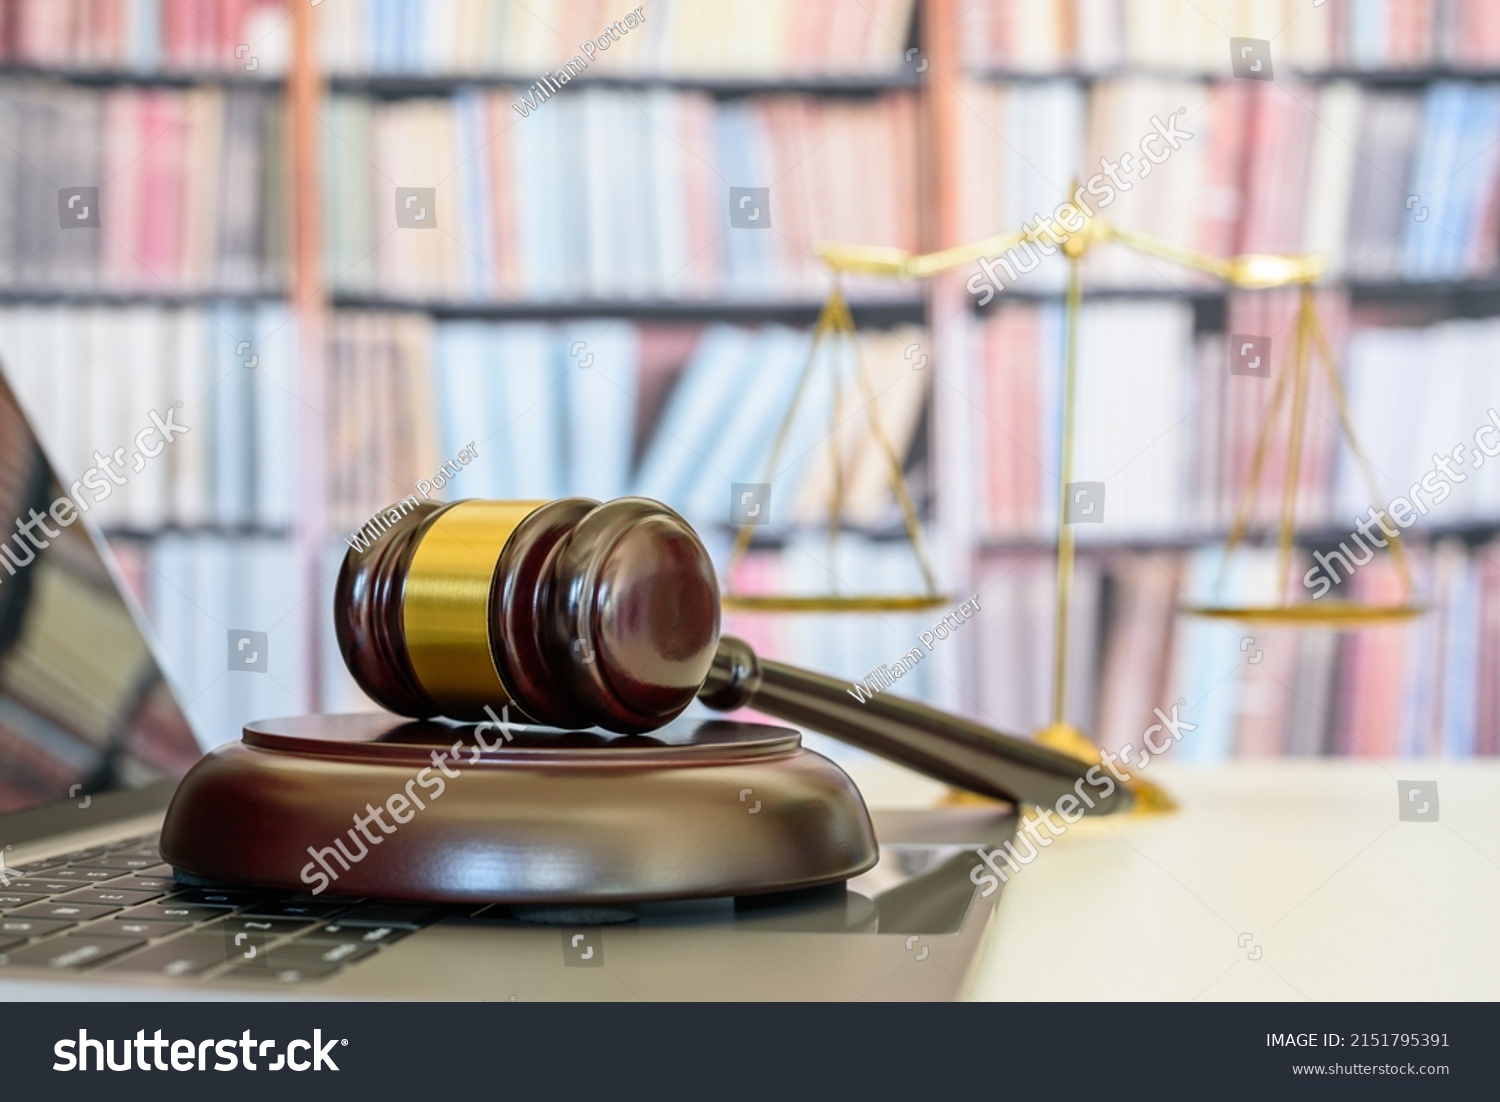 Legal office of lawyers, justice and law concept : Judge gavel or a hammer and a base used by a judge person on a desk in a courtroom with blurred weight scale of justice, bookshelf background behind. #2151795391